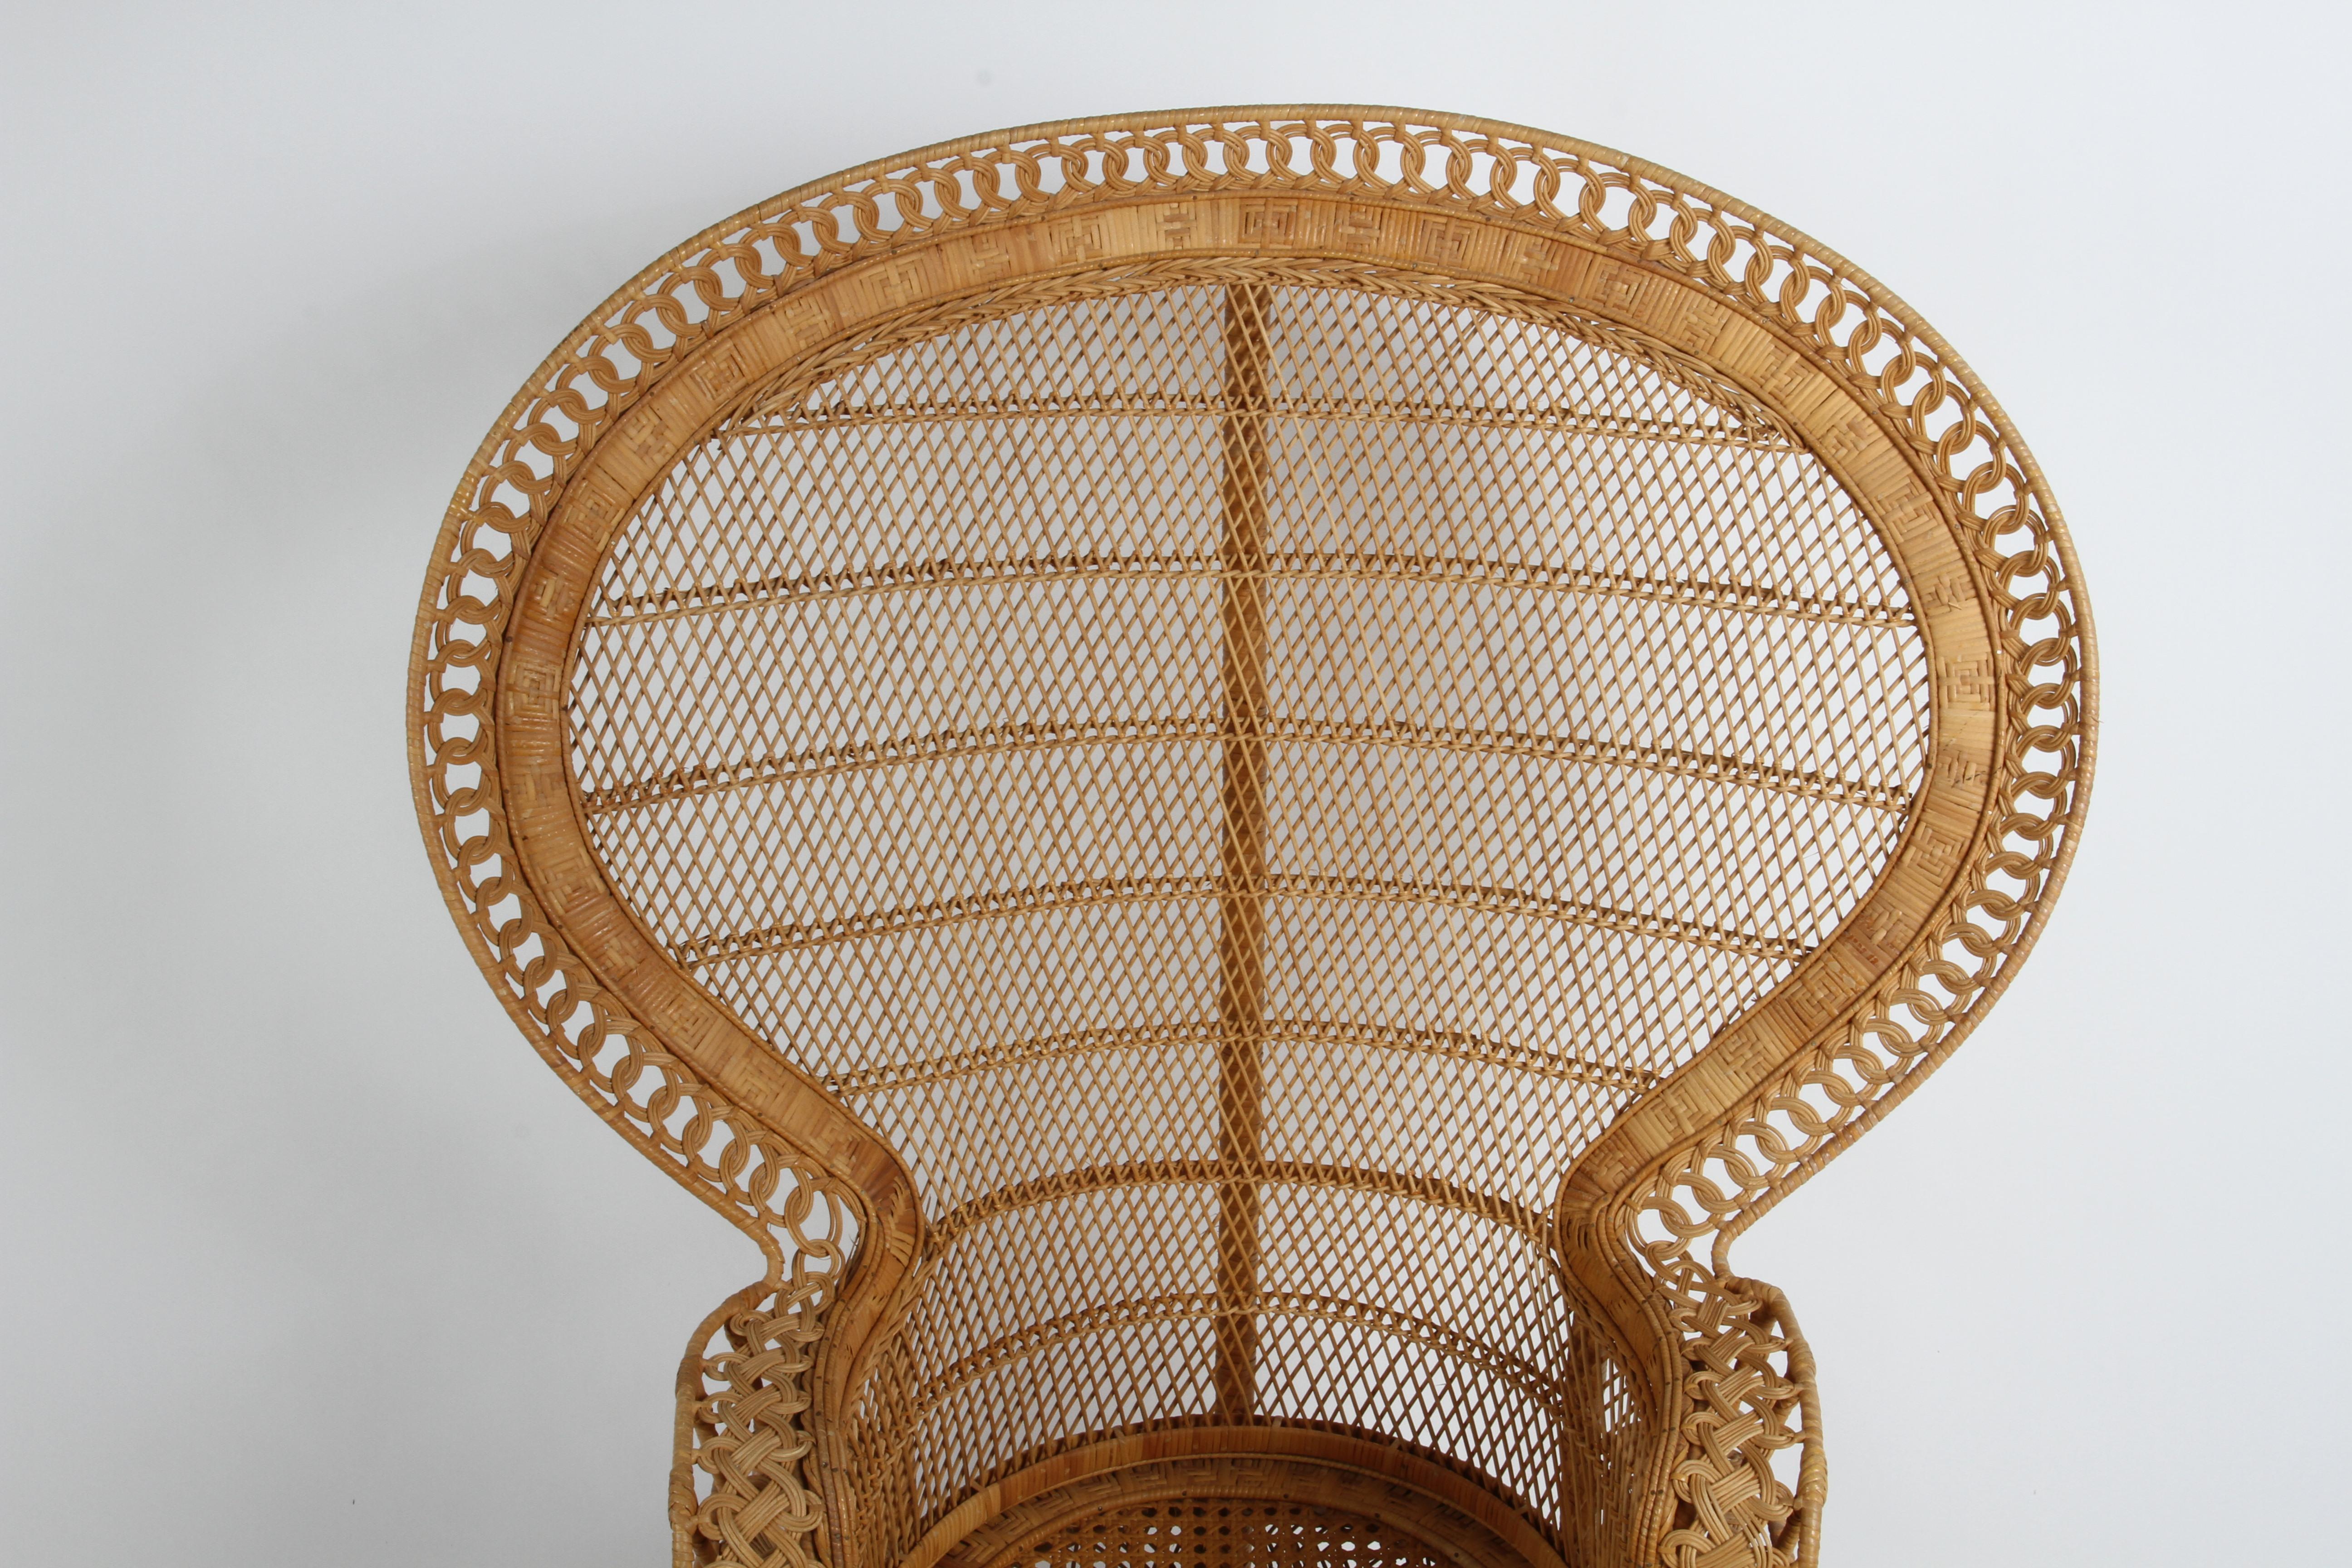 Bohemian Vintage 1970s Rattan & Wicker Handcrafted Boho Chic Emmanuelle Peacock Chair